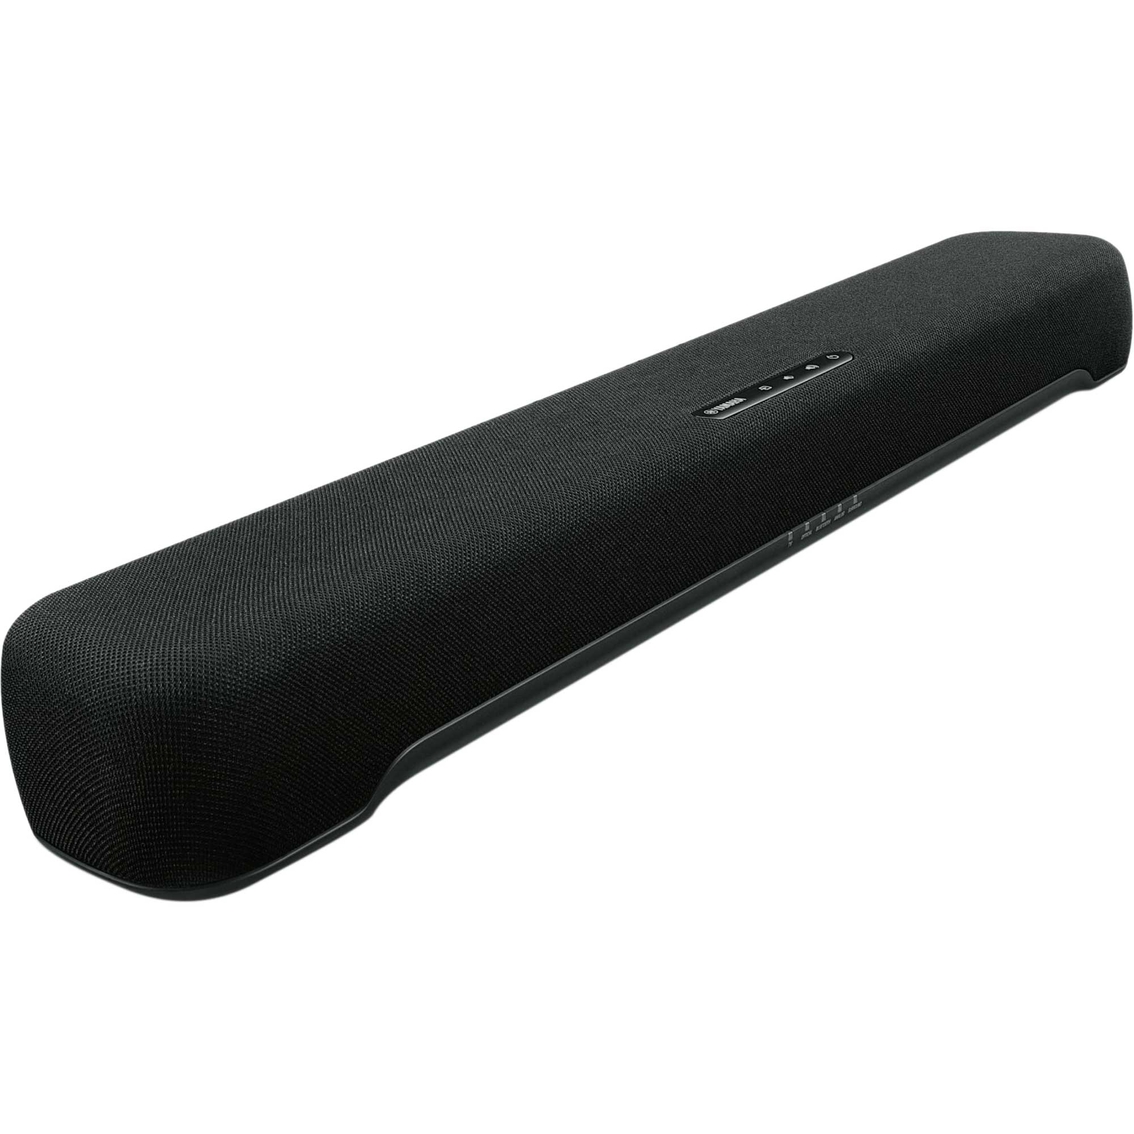 Yamaha Compact Soundbar with Built In Subwoofer and Bluetooth - Image 2 of 6